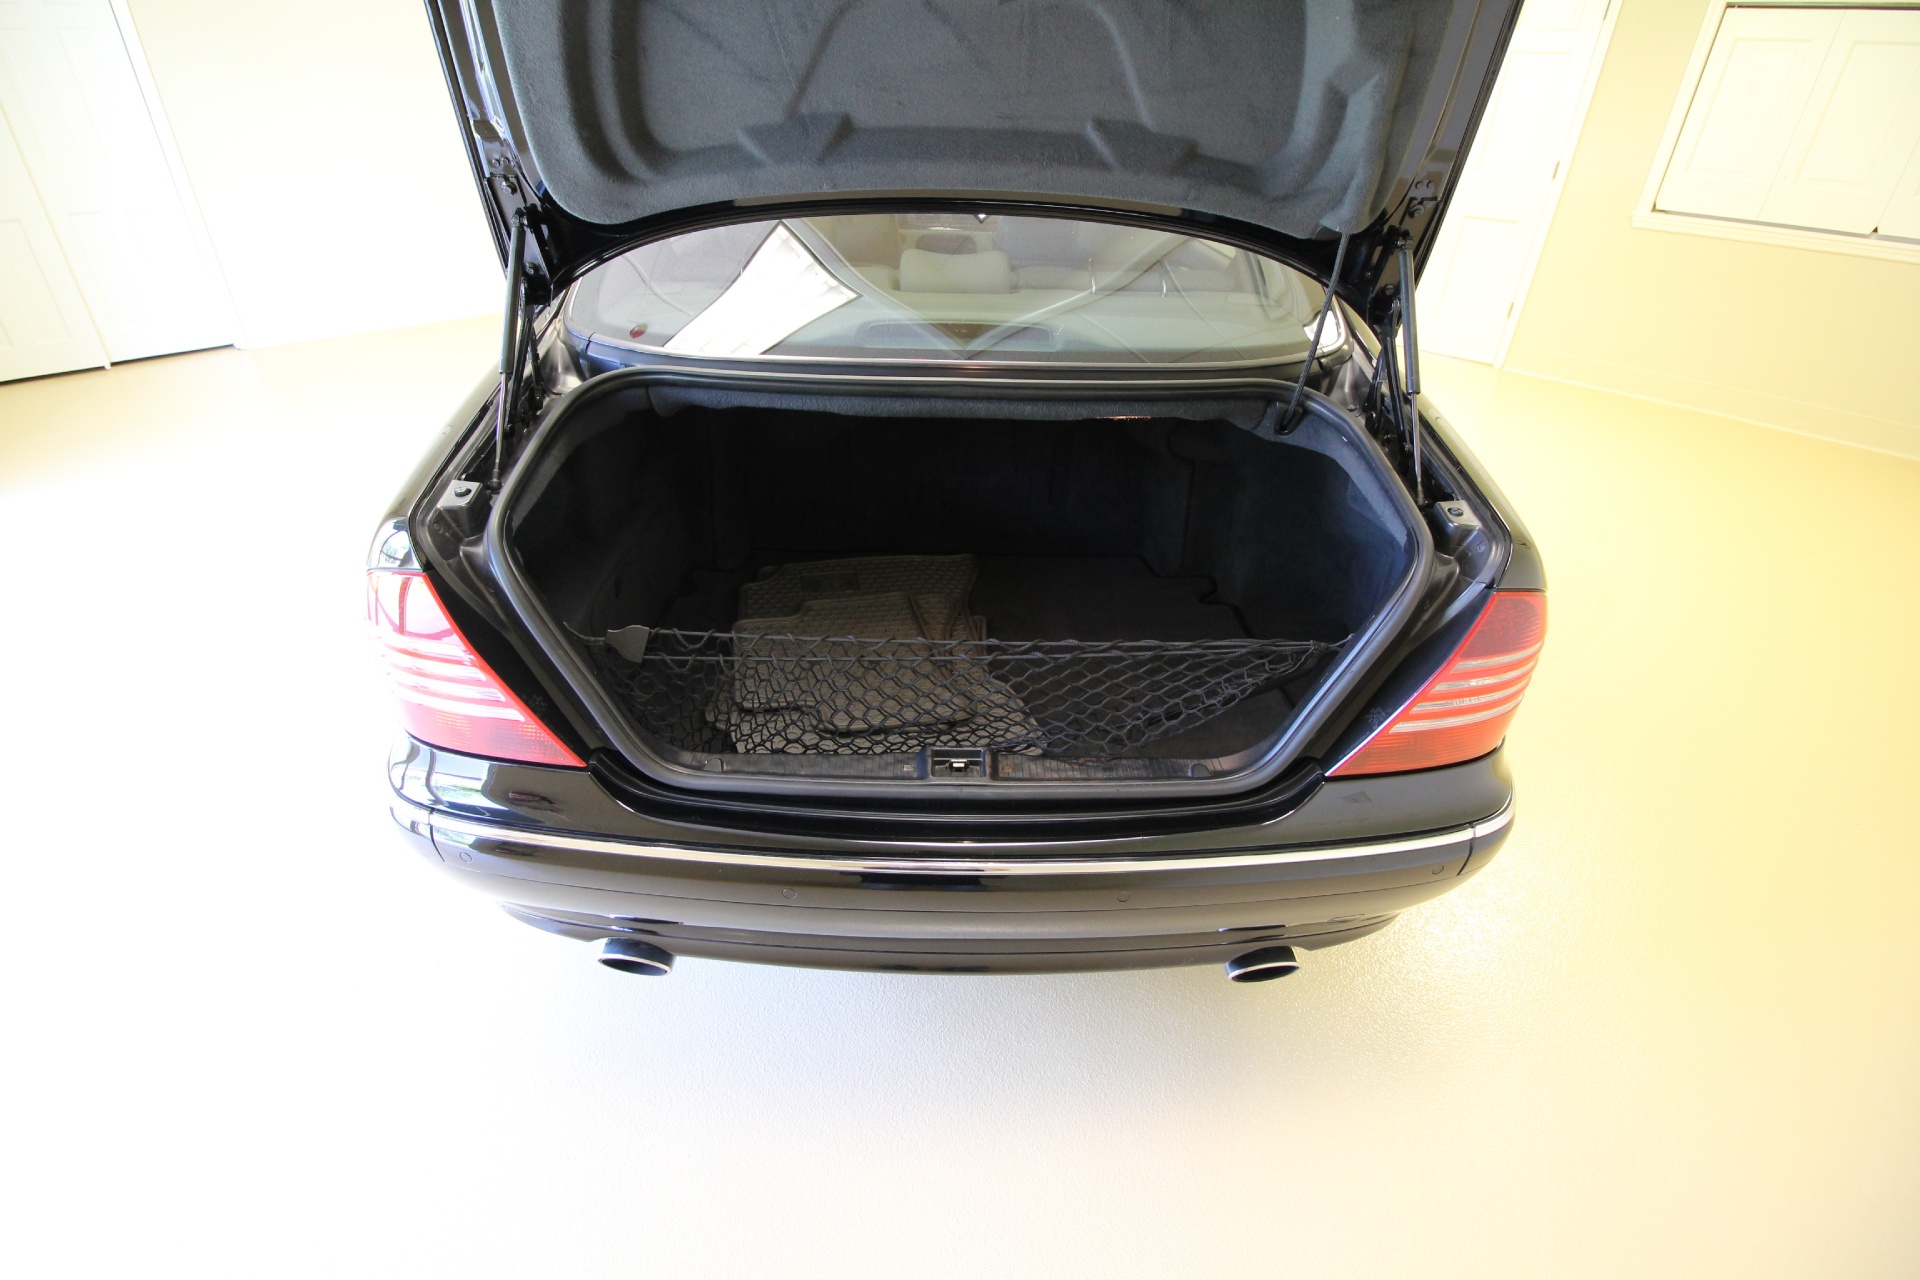 Used 2004 Black Mercedes-Benz S-Class S600 SUPERB CONDITION,LOW MILES | Albany, NY